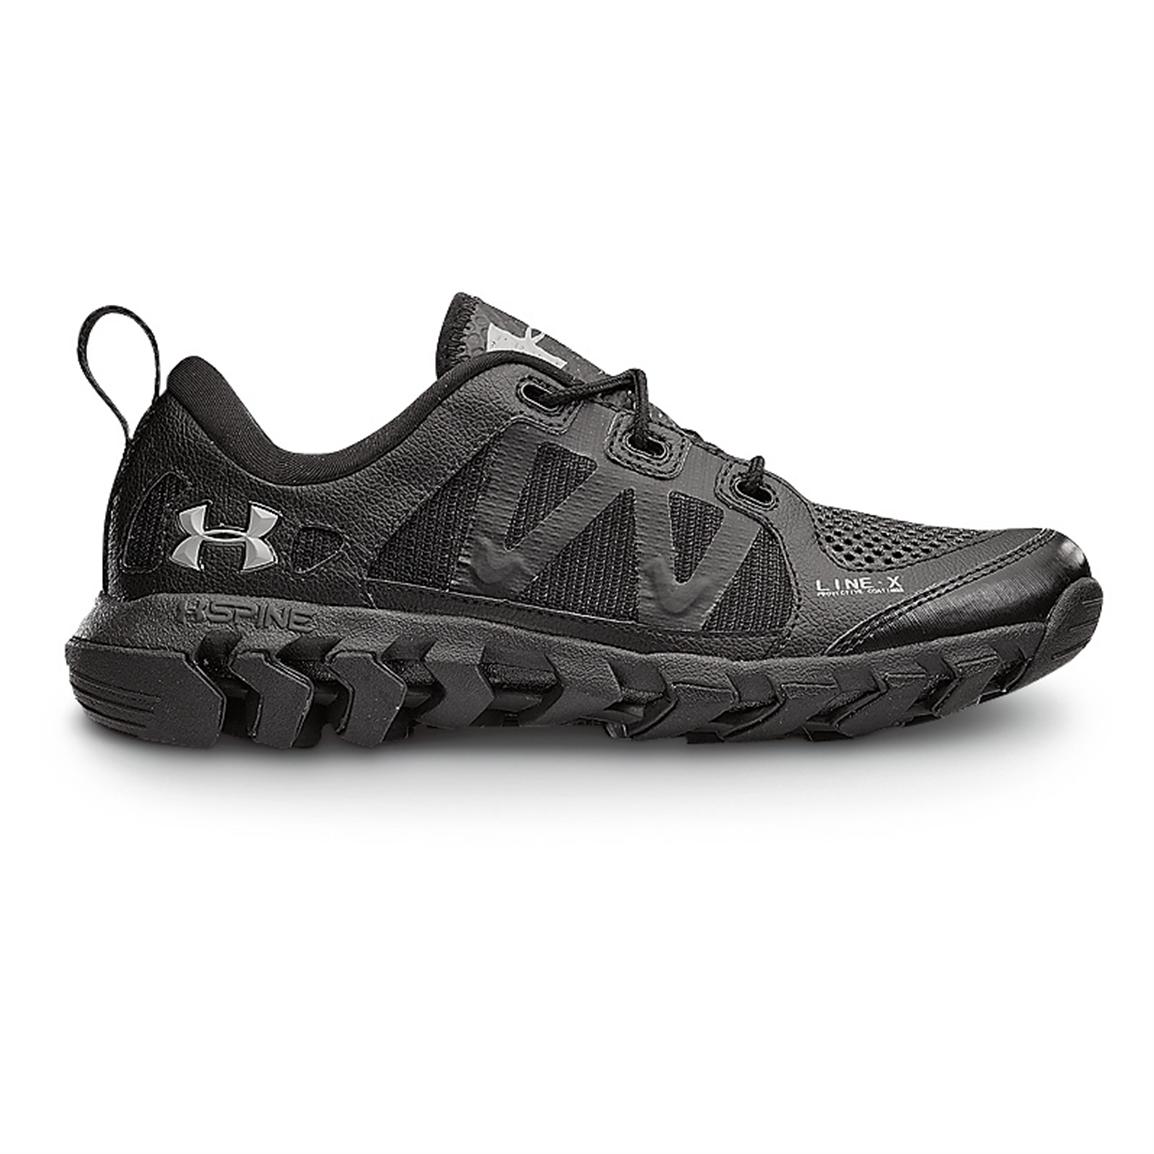 under armour men's water boat shoes